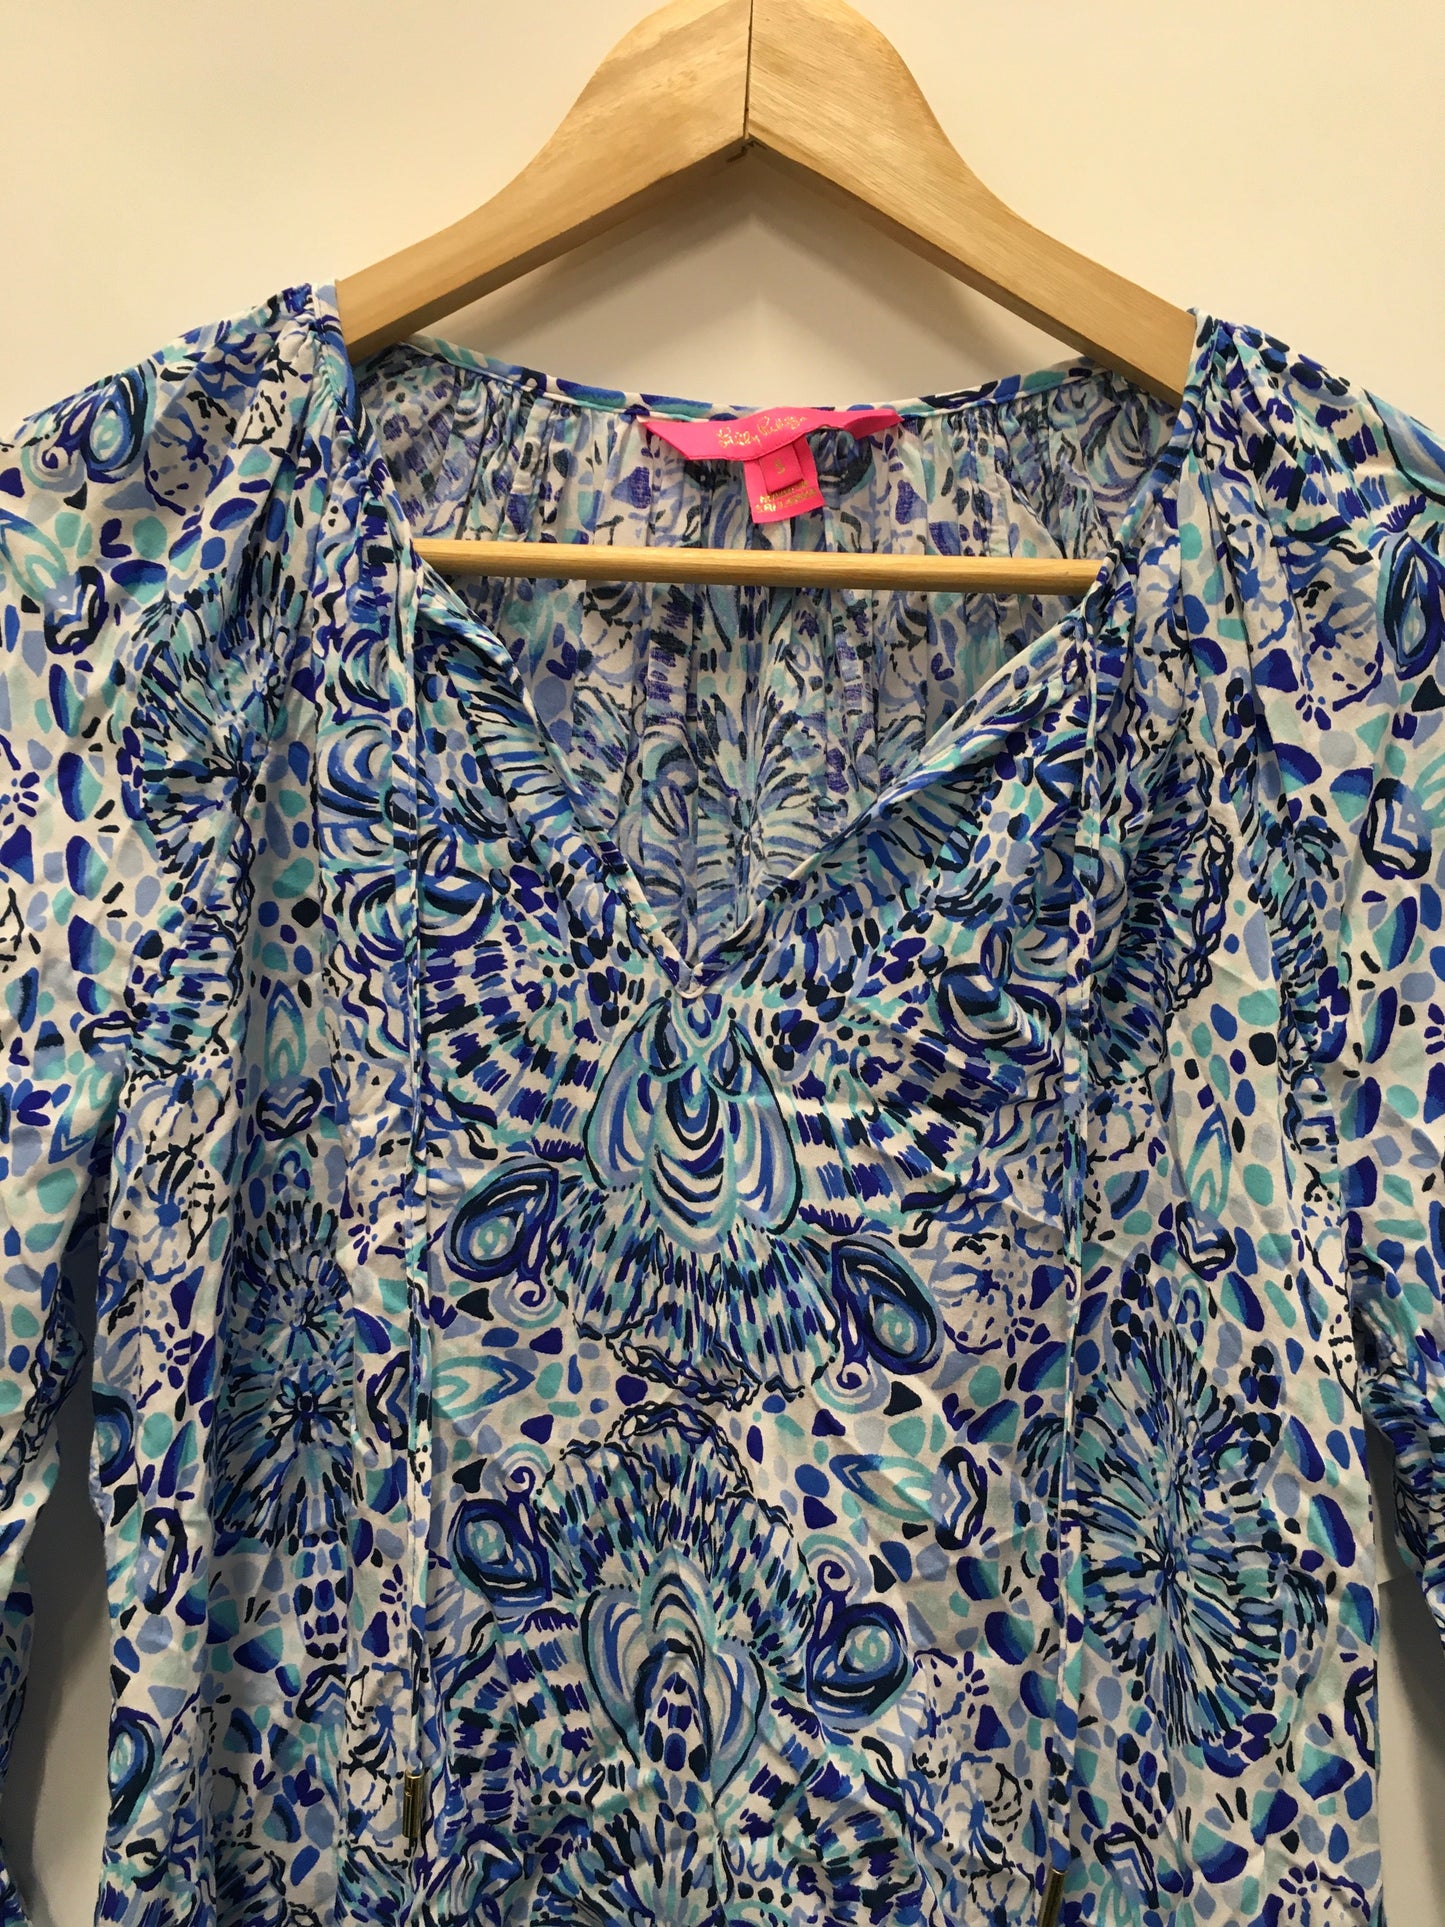 Top Long Sleeve By Lilly Pulitzer  Size: S